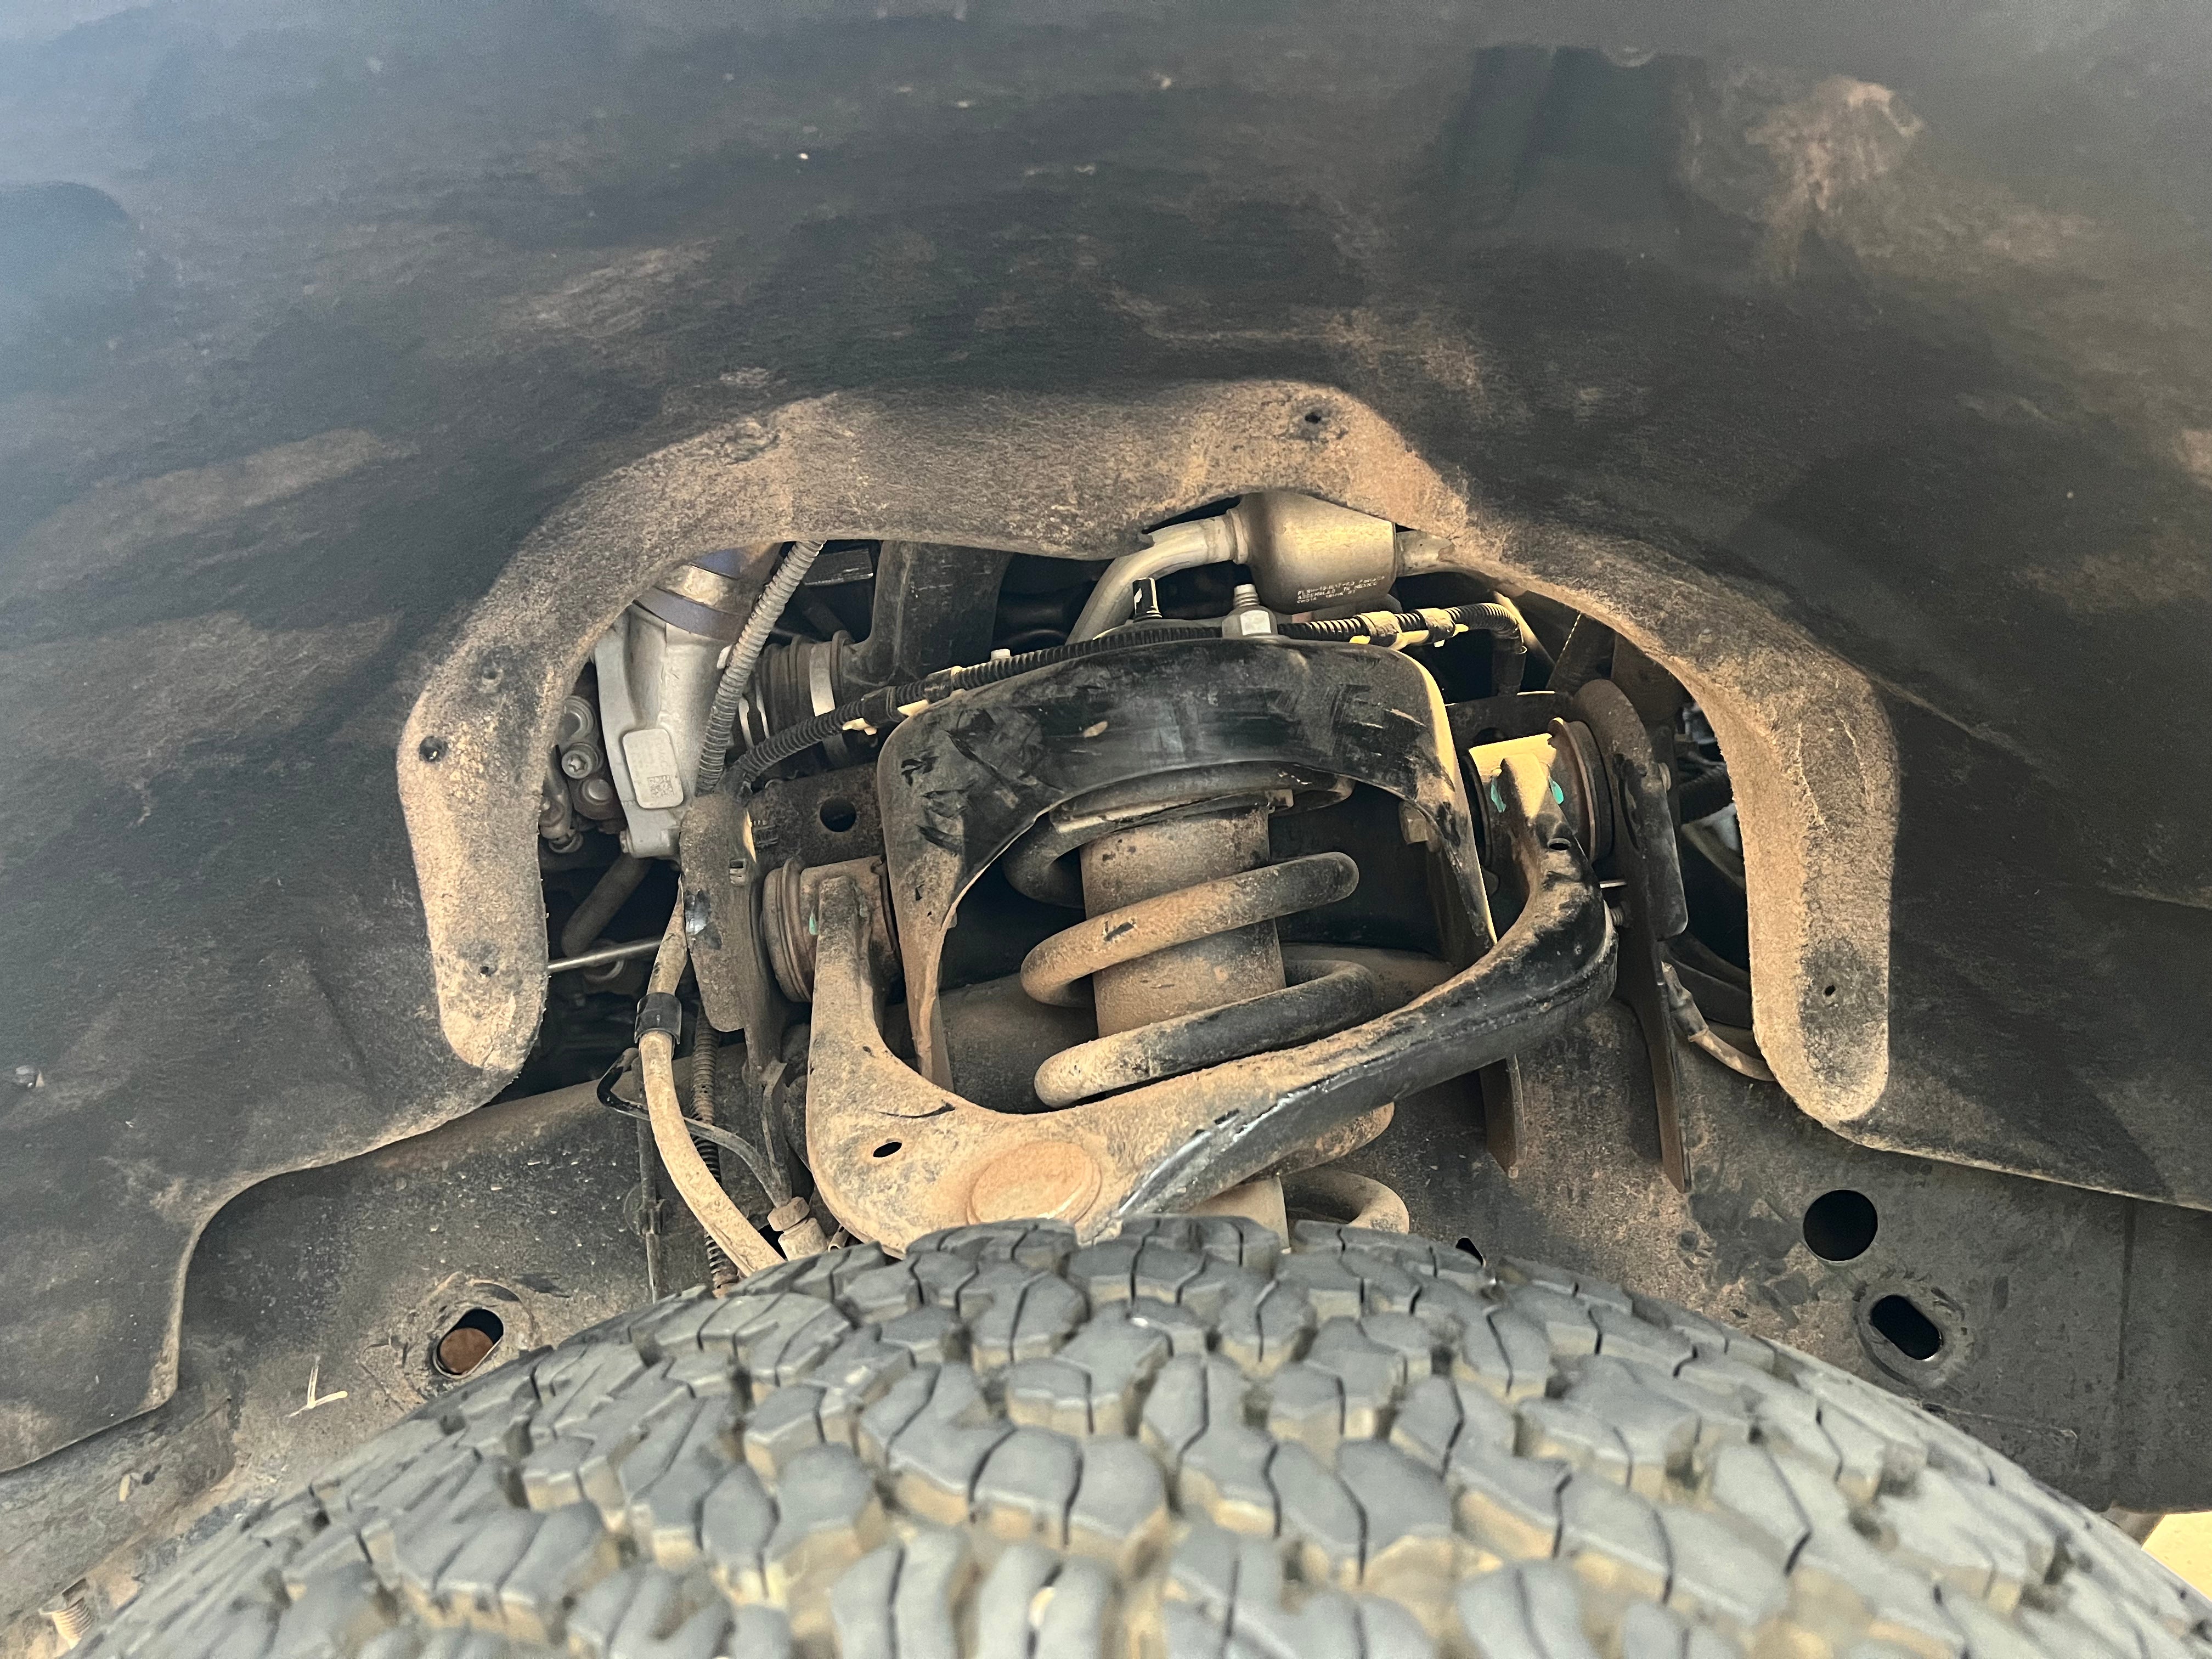 2015-2020 ford f 150 eco boost before having ark splash guards installed showing the opening to the engine bay between the fender liner and the body of the 2015-2020 ford f150 ecoboost and all the exposed components